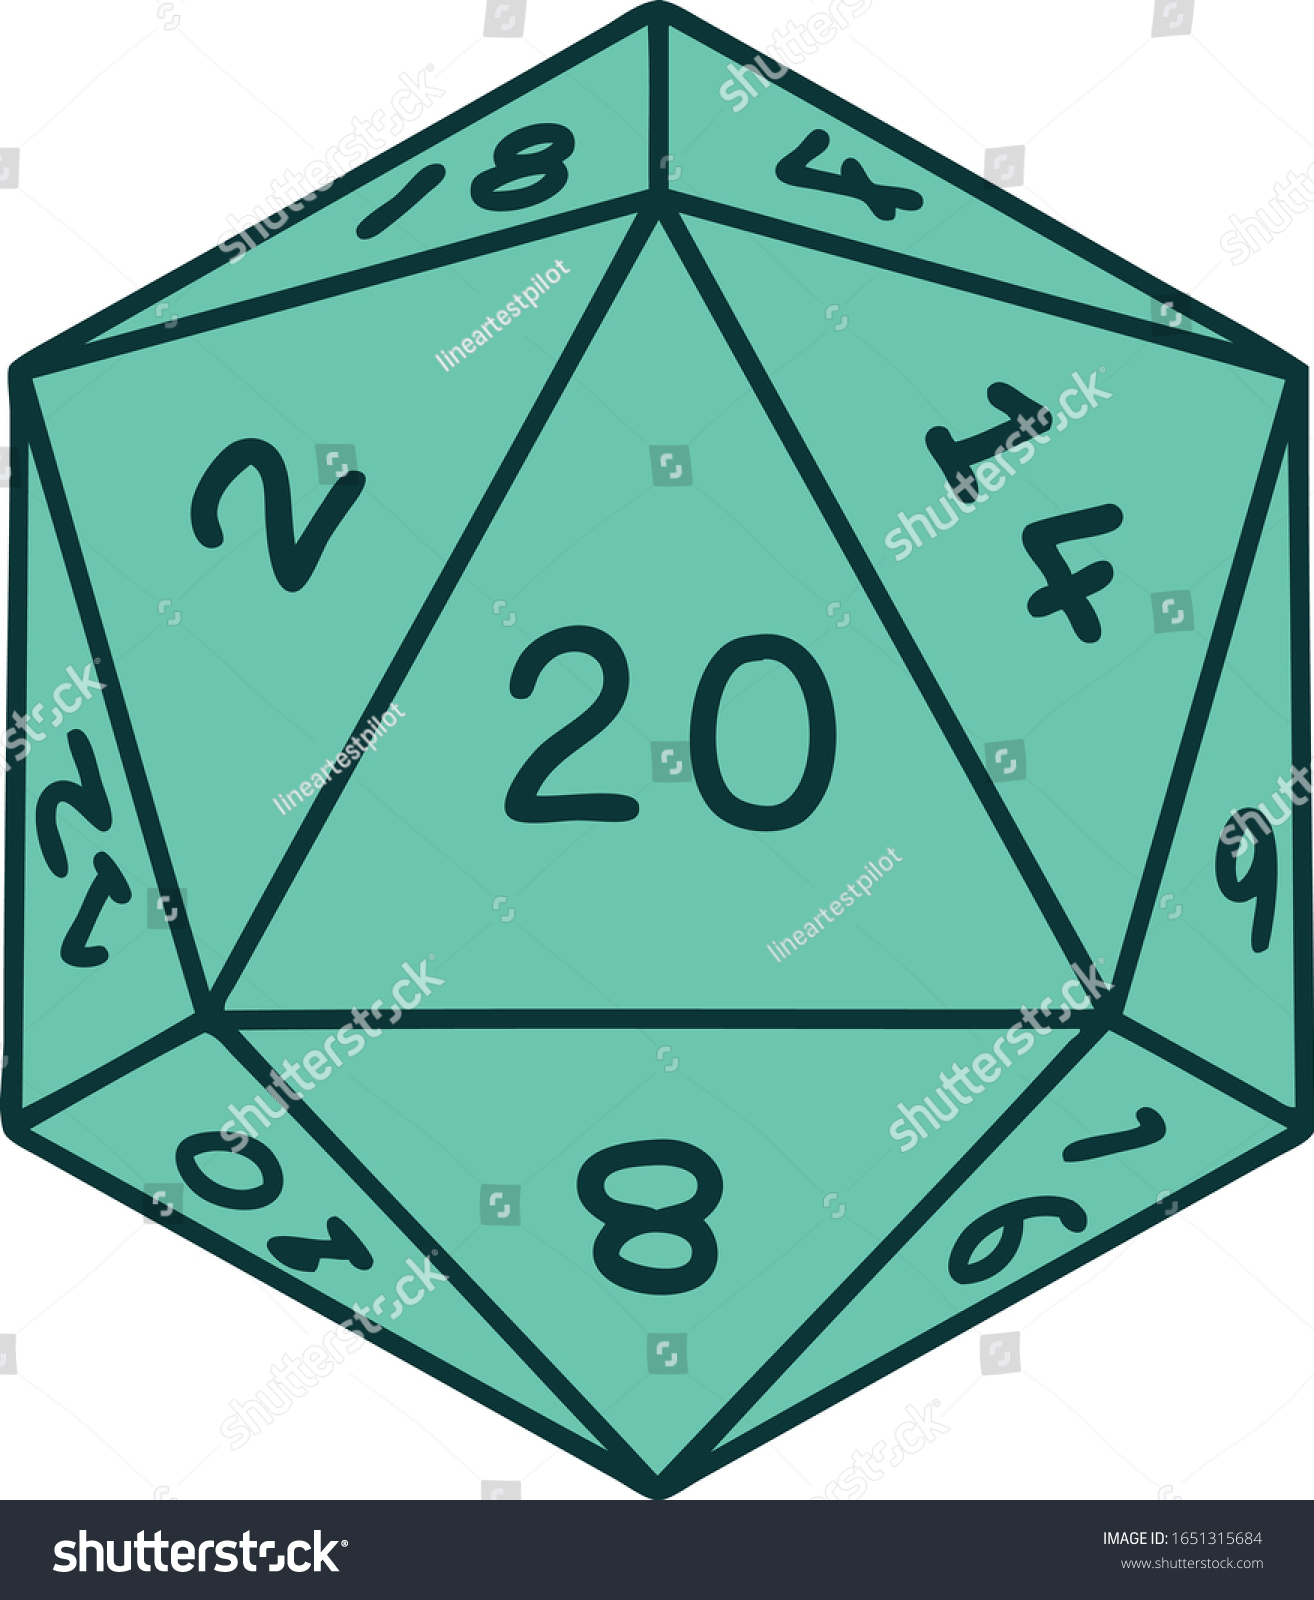 SVG of iconic tattoo style image of a d20 dice svg